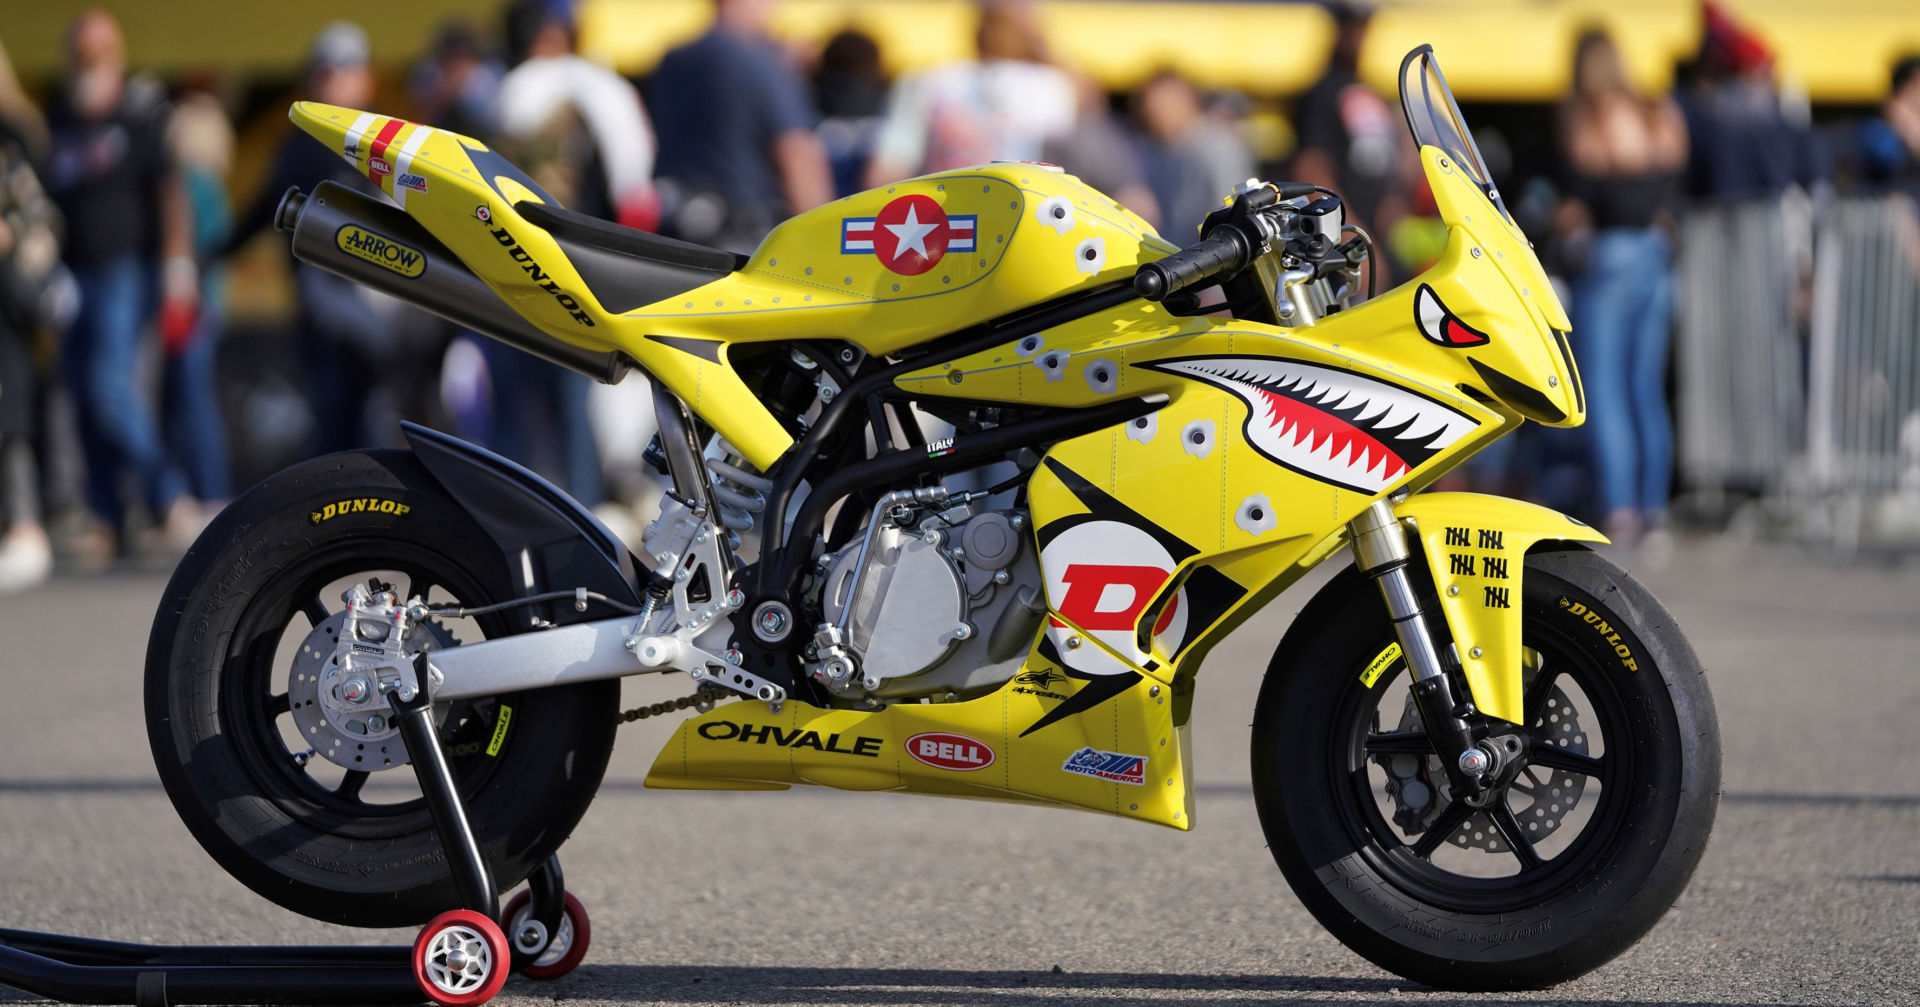 Dunlop is giving away this customized and race-ready Ohvale. Photo courtesy Dunlop.